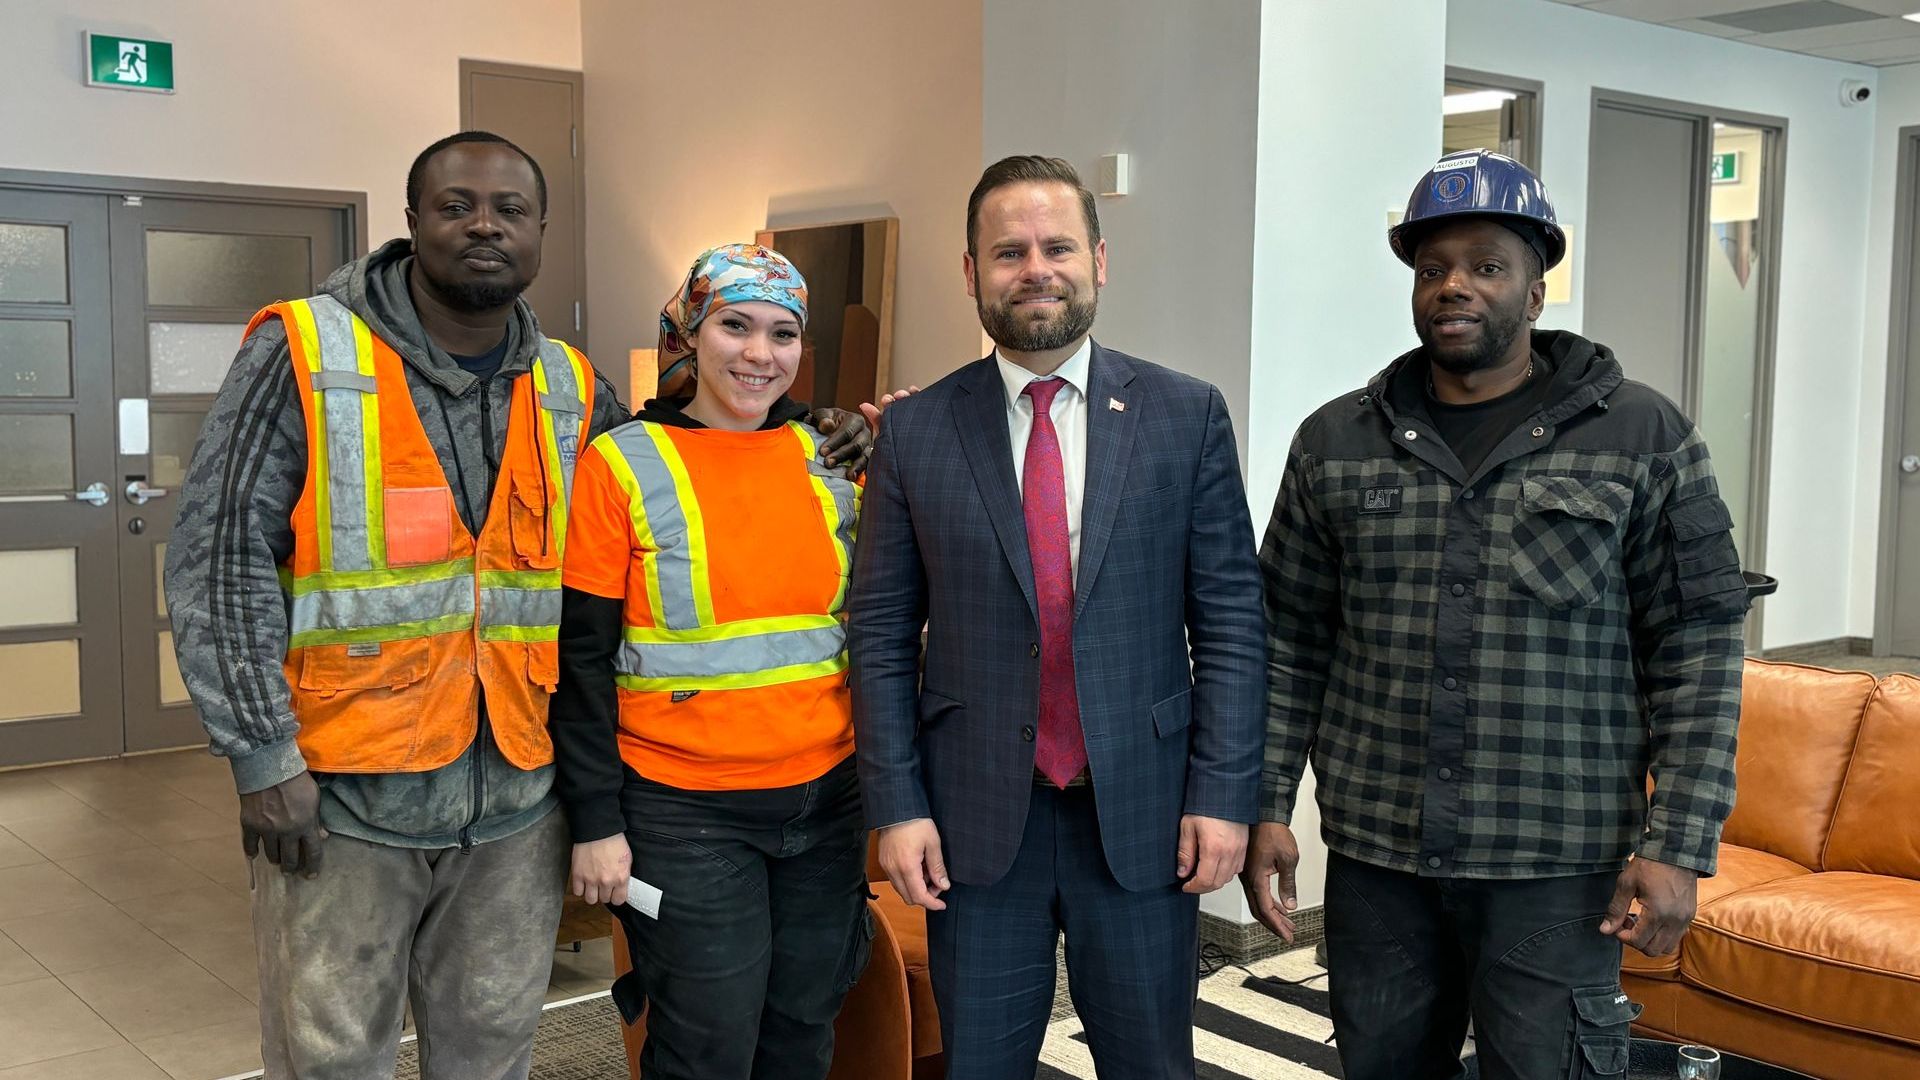 A group of construction workers are posing for a picture with a man in a suit.